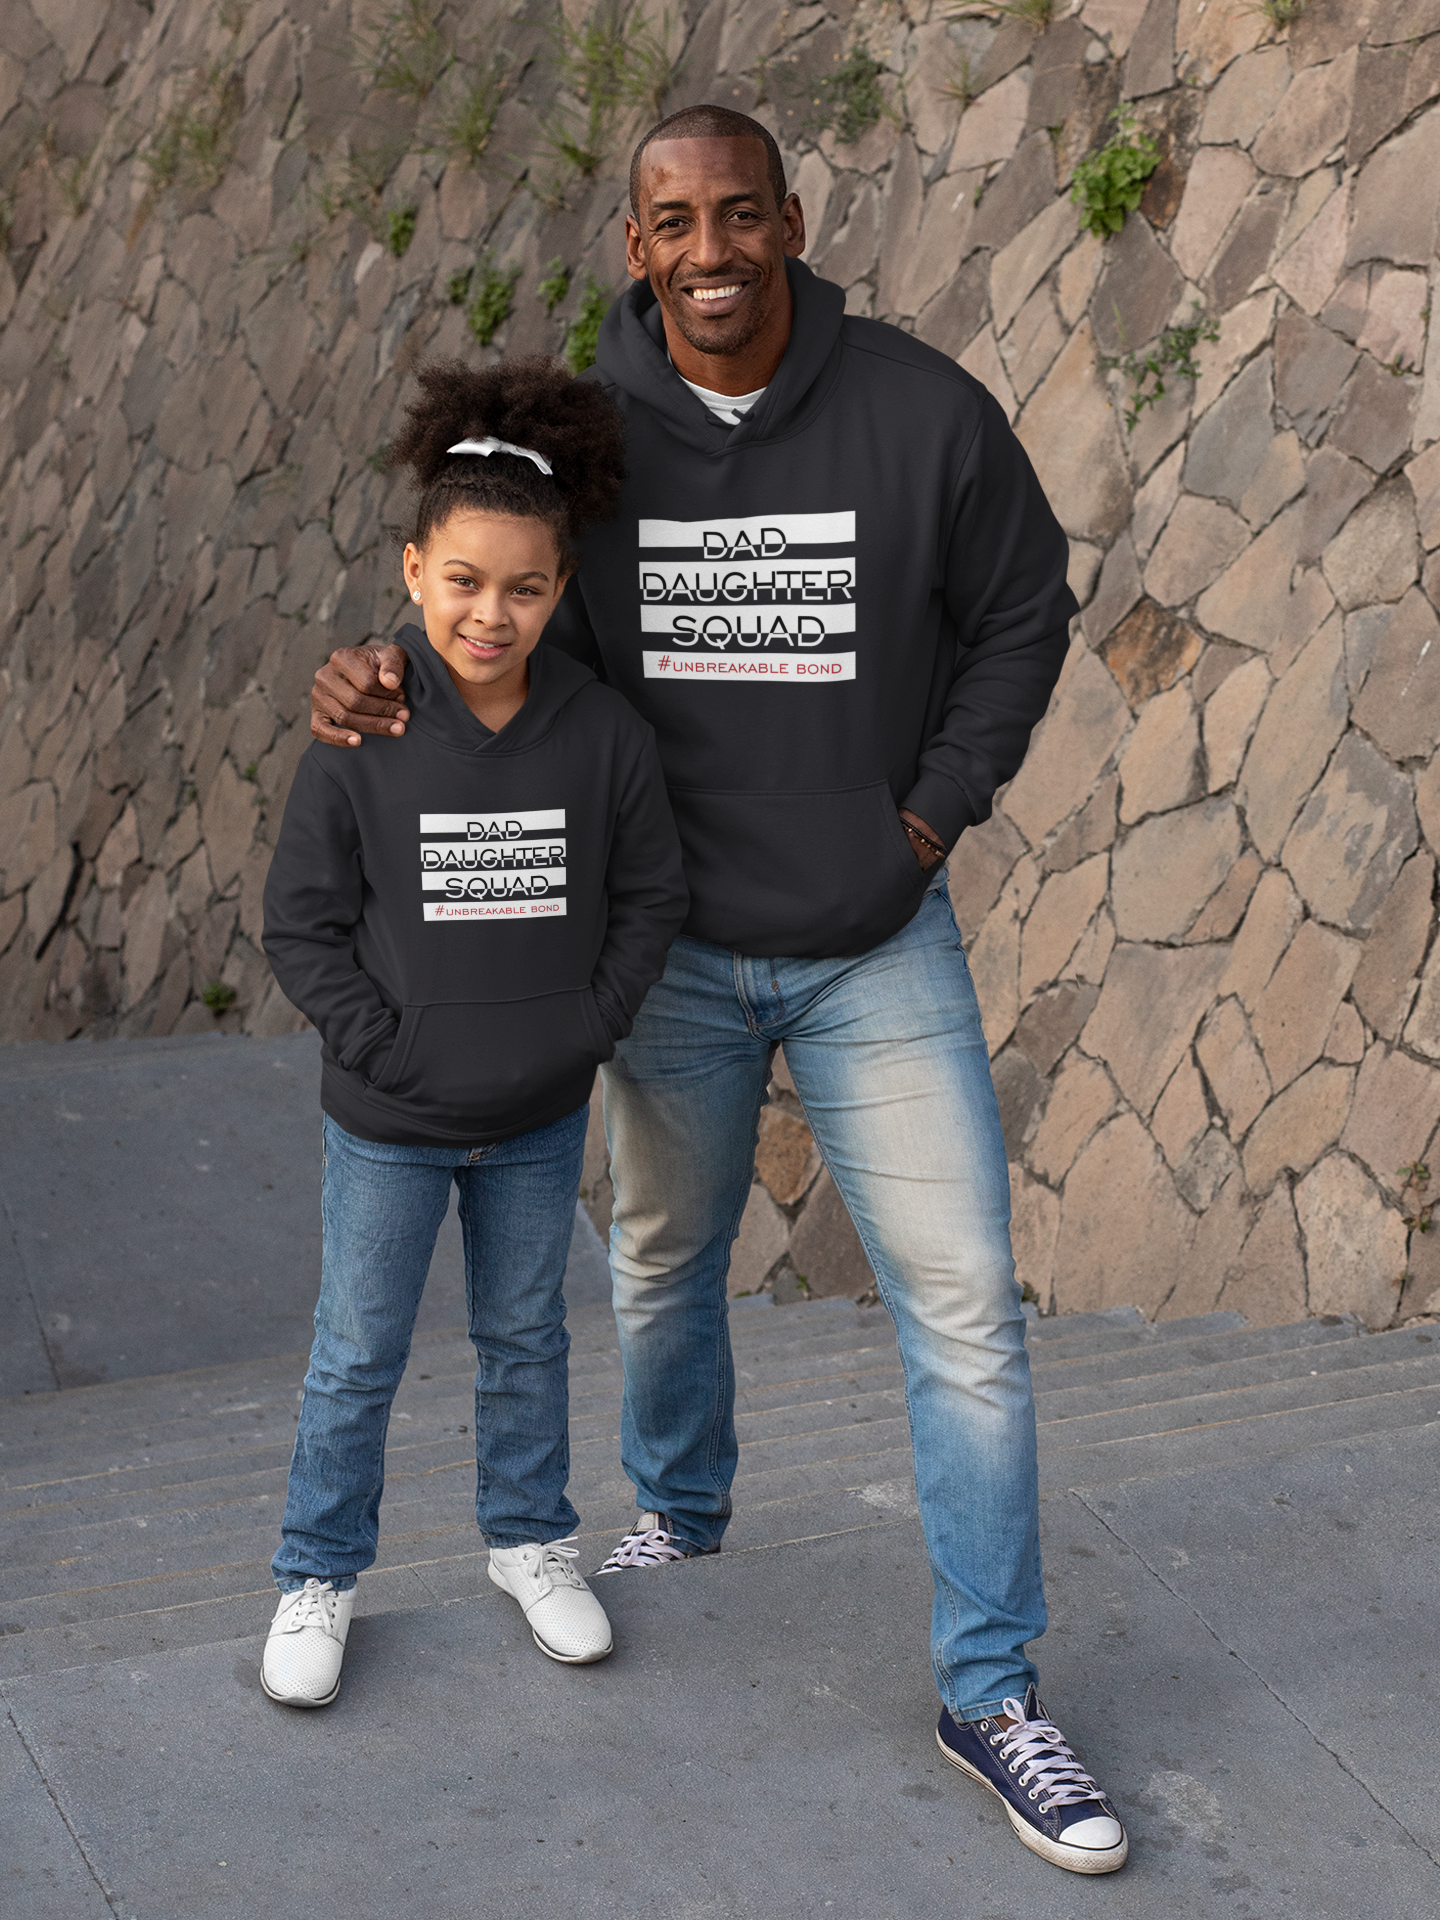 Dad Daughter Squad Father and Daughter Black Matching Hoodies- FunkyTradition